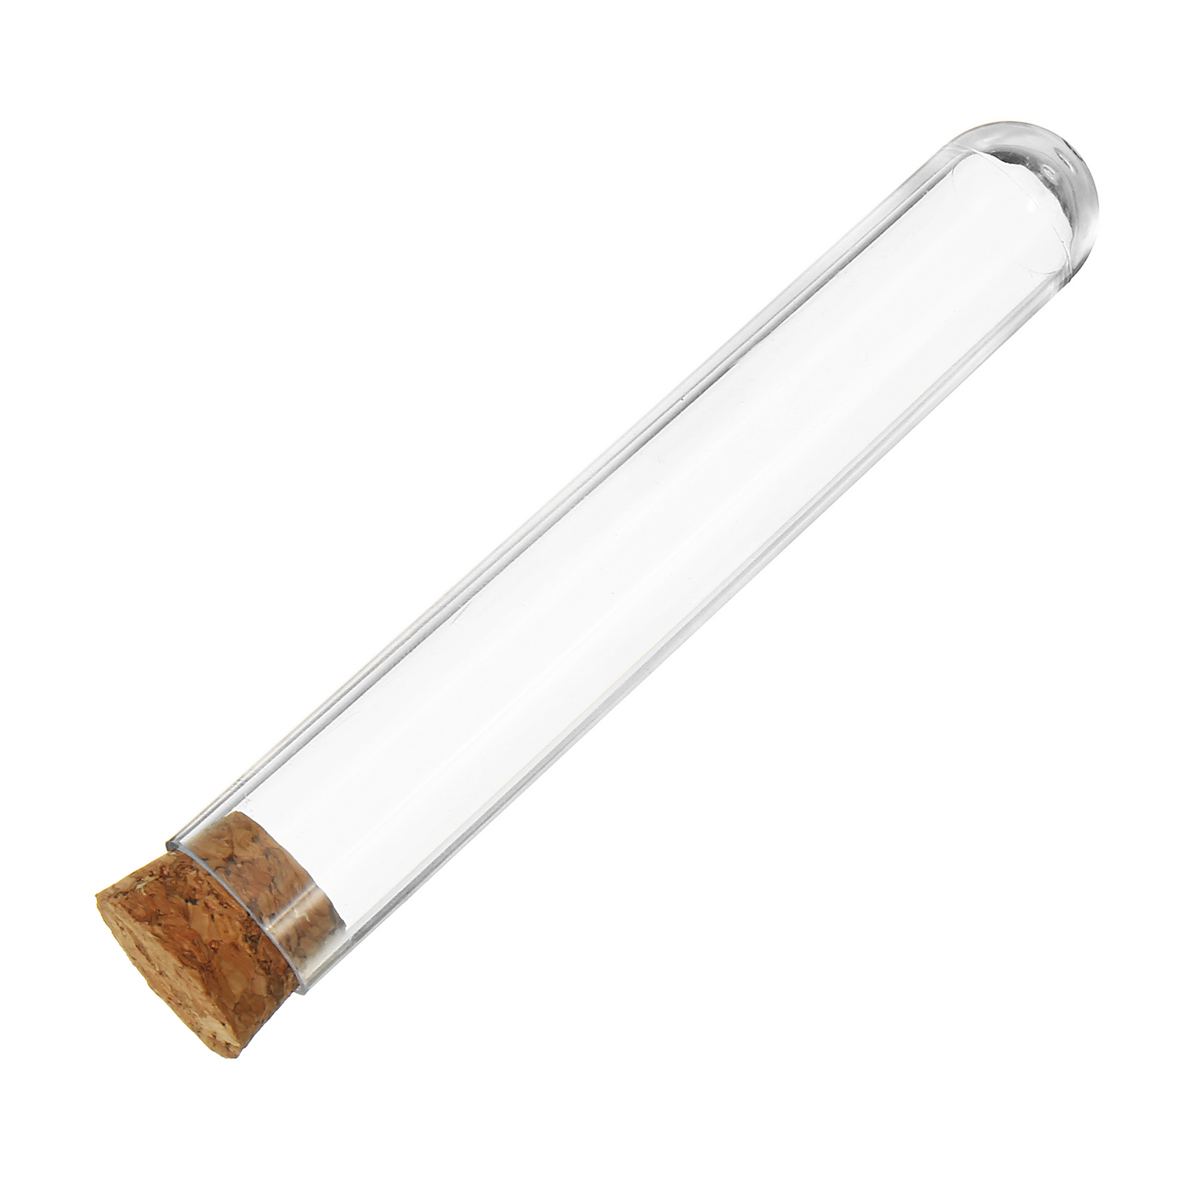 10Pcs-18100mm-Plastic-Glass-Test-Tube-With-Cork-Stopper-Medical-Lab-Supplies-1408563